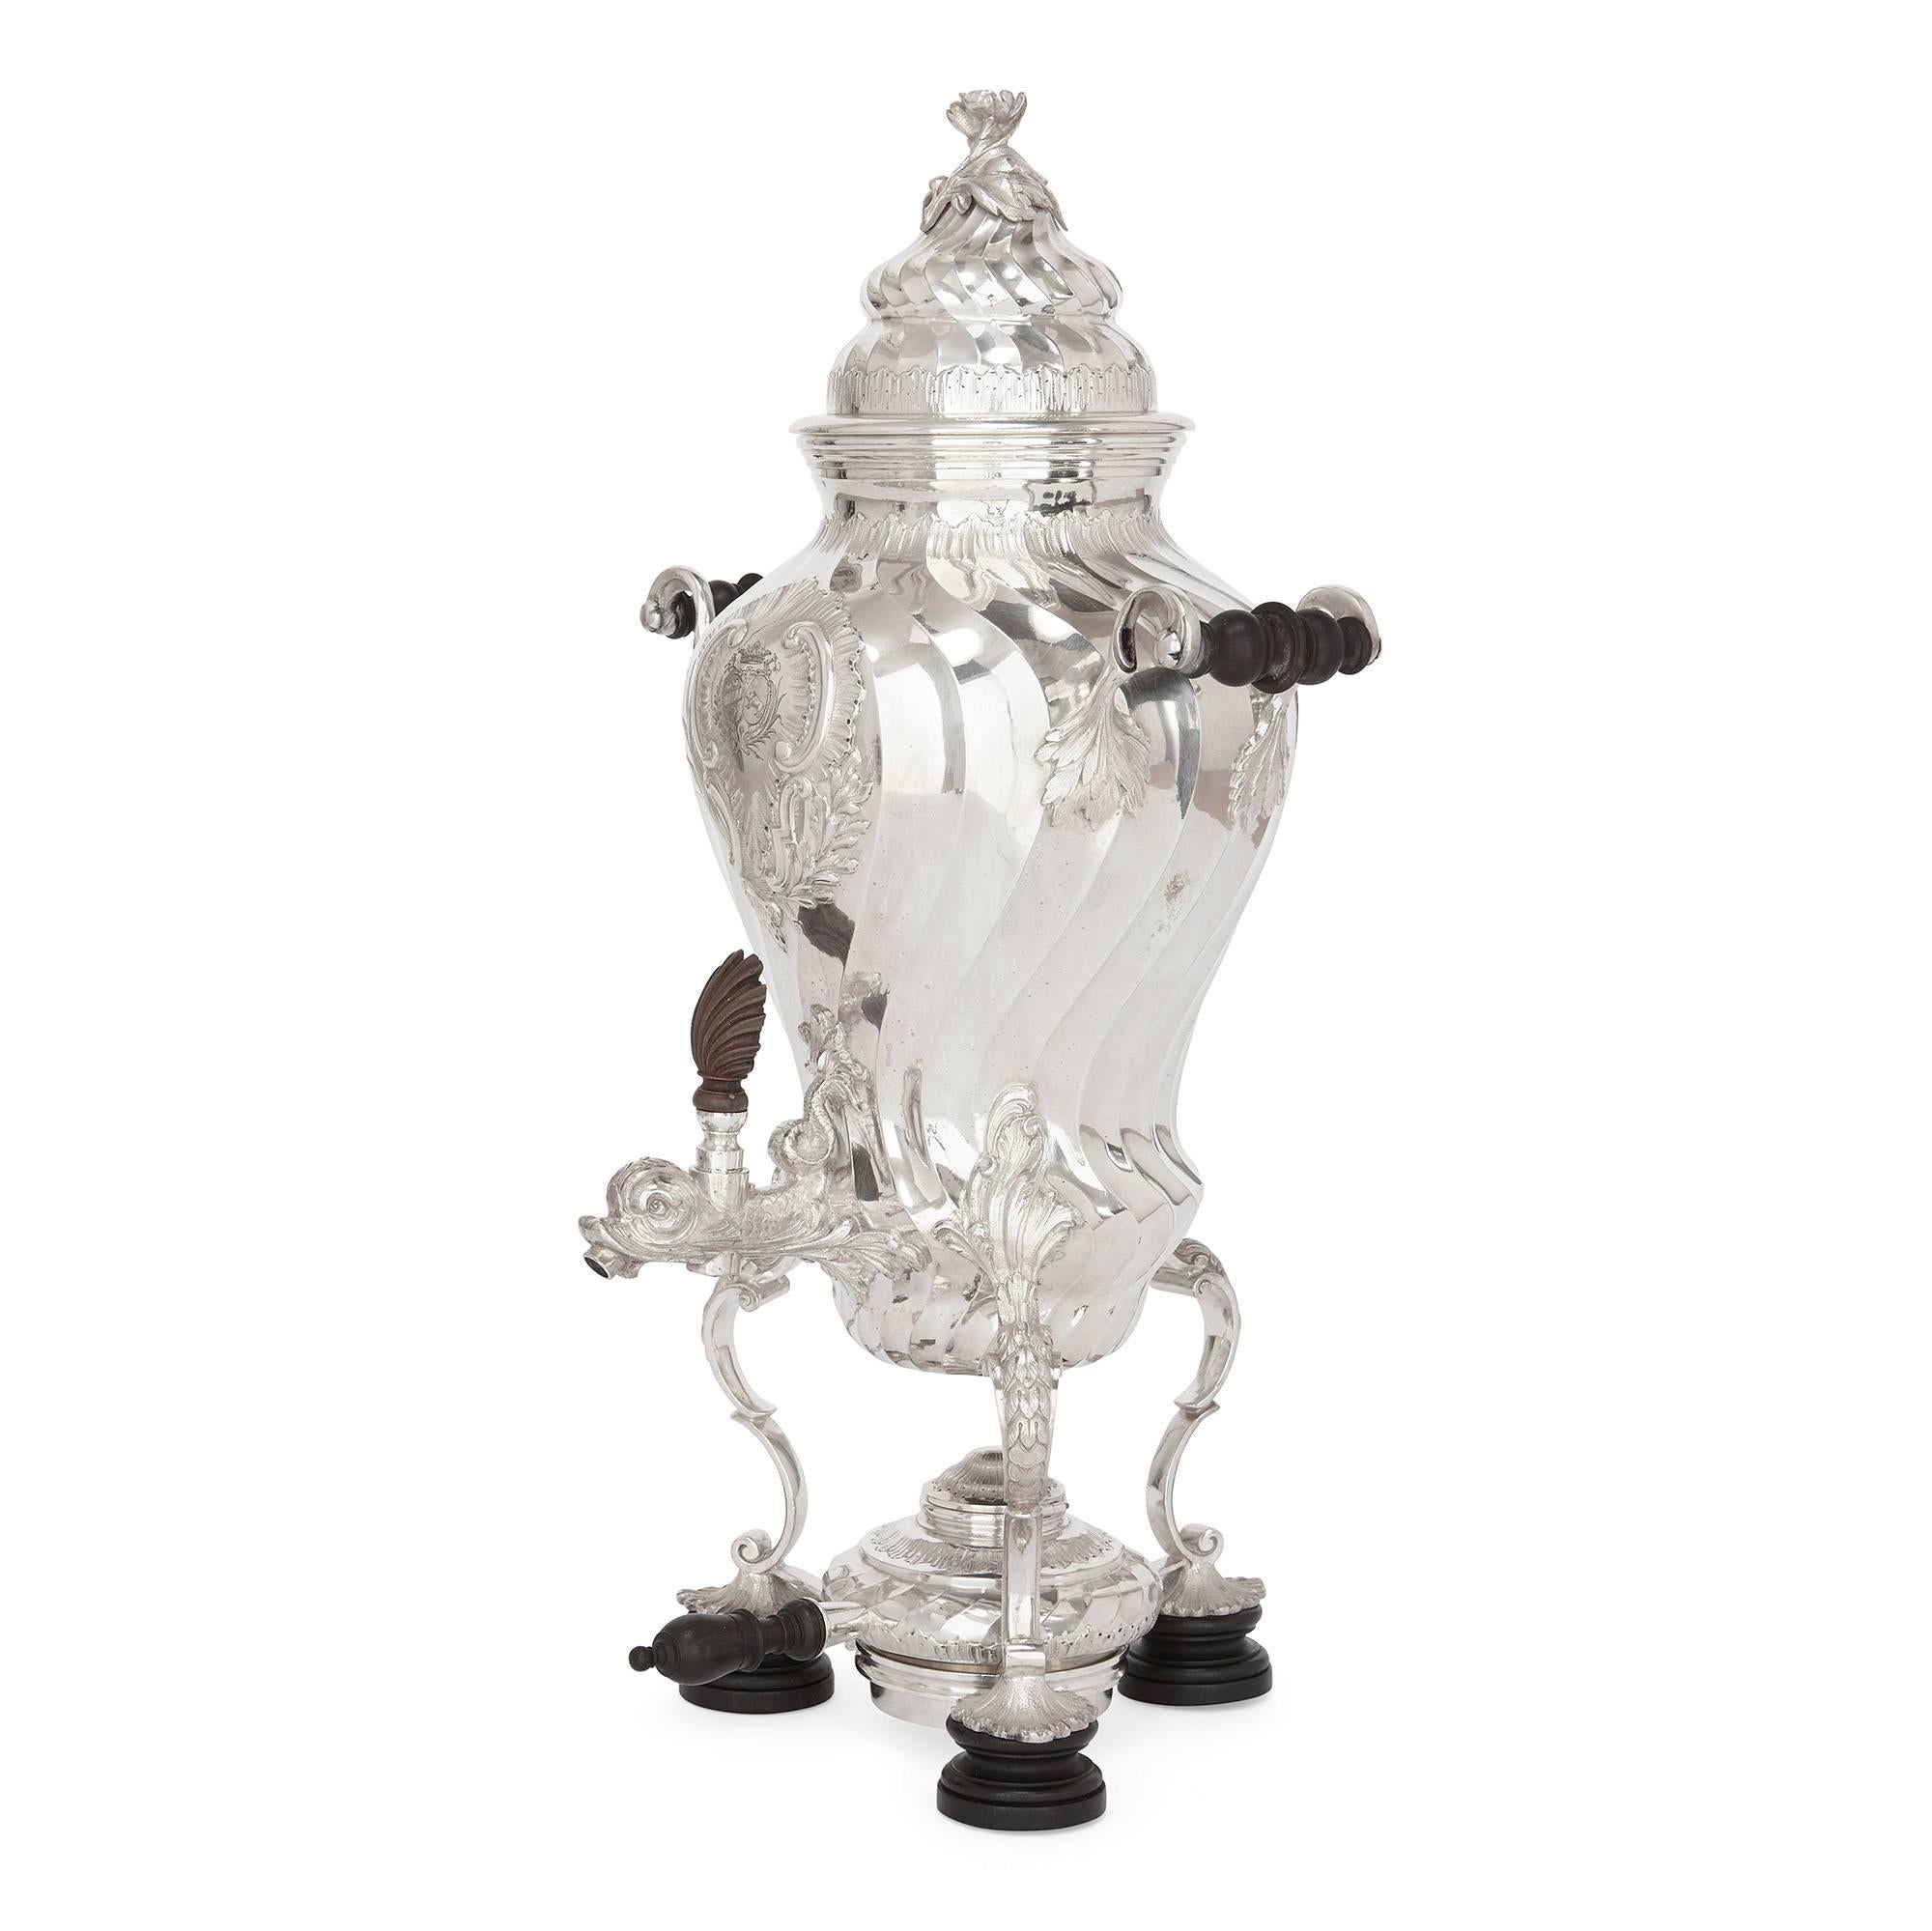 This stunning antique silver tea and coffee set consists of: one silver coffee pot with a wooden handle; one silver tea pot with a wooden handle; one silver cream just with a wooden handle; one silver sugar bowl with gilt inside; one silver-plated